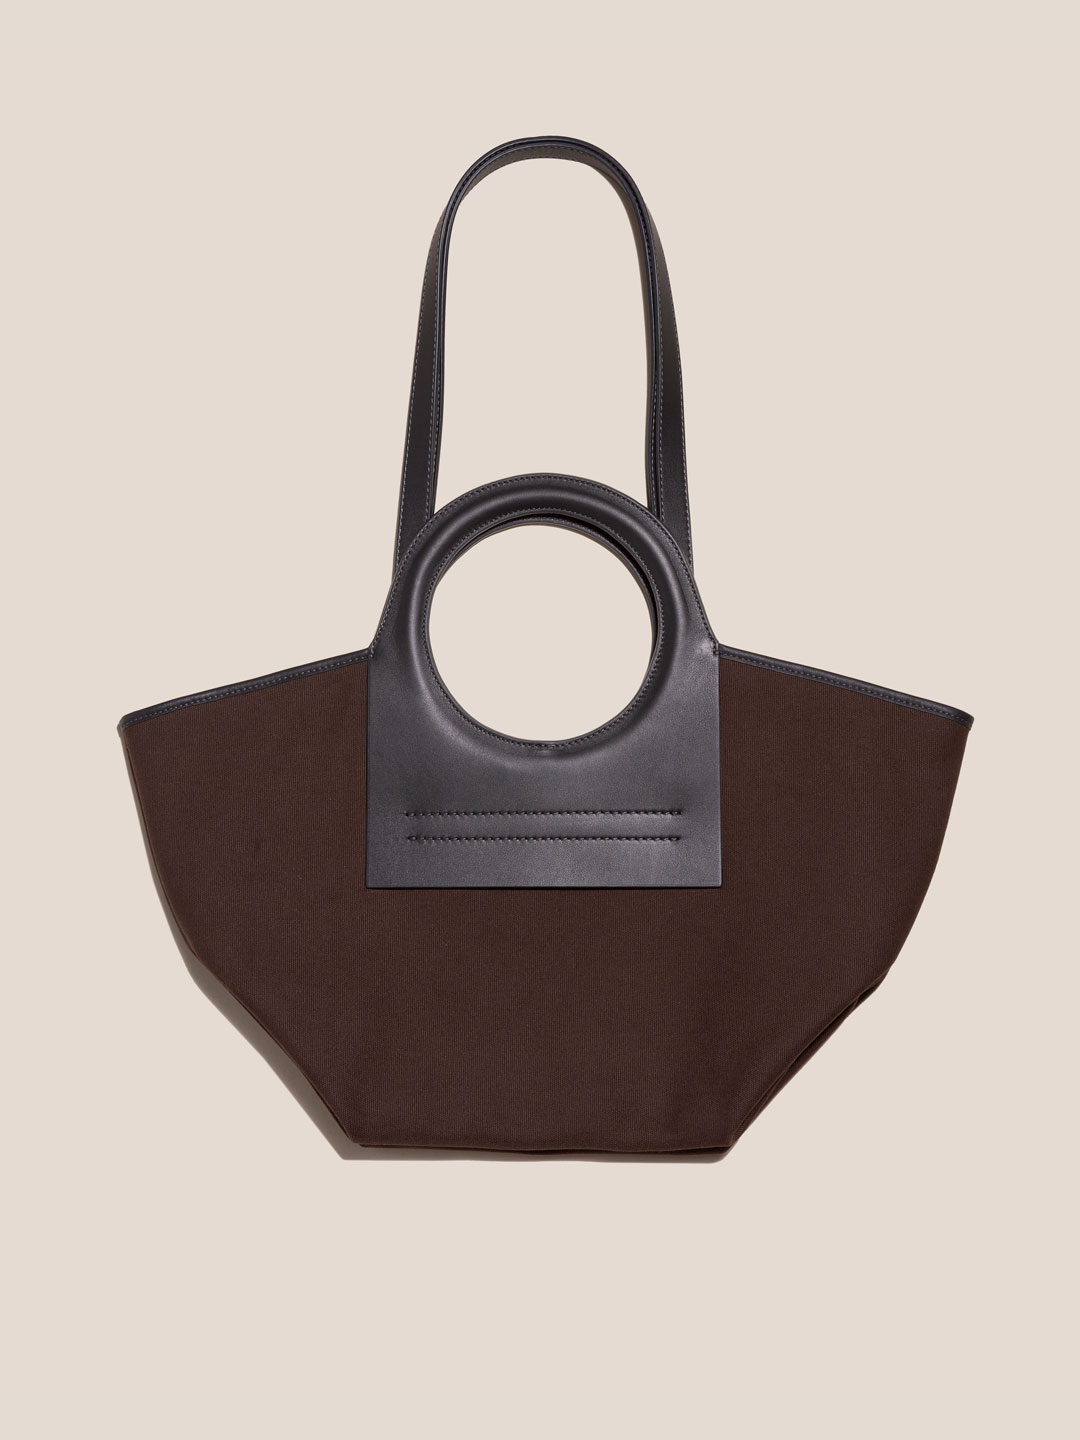 CALA S - Leather-trimmed Canvas Tote Bag - Dark Brown/Charcoal